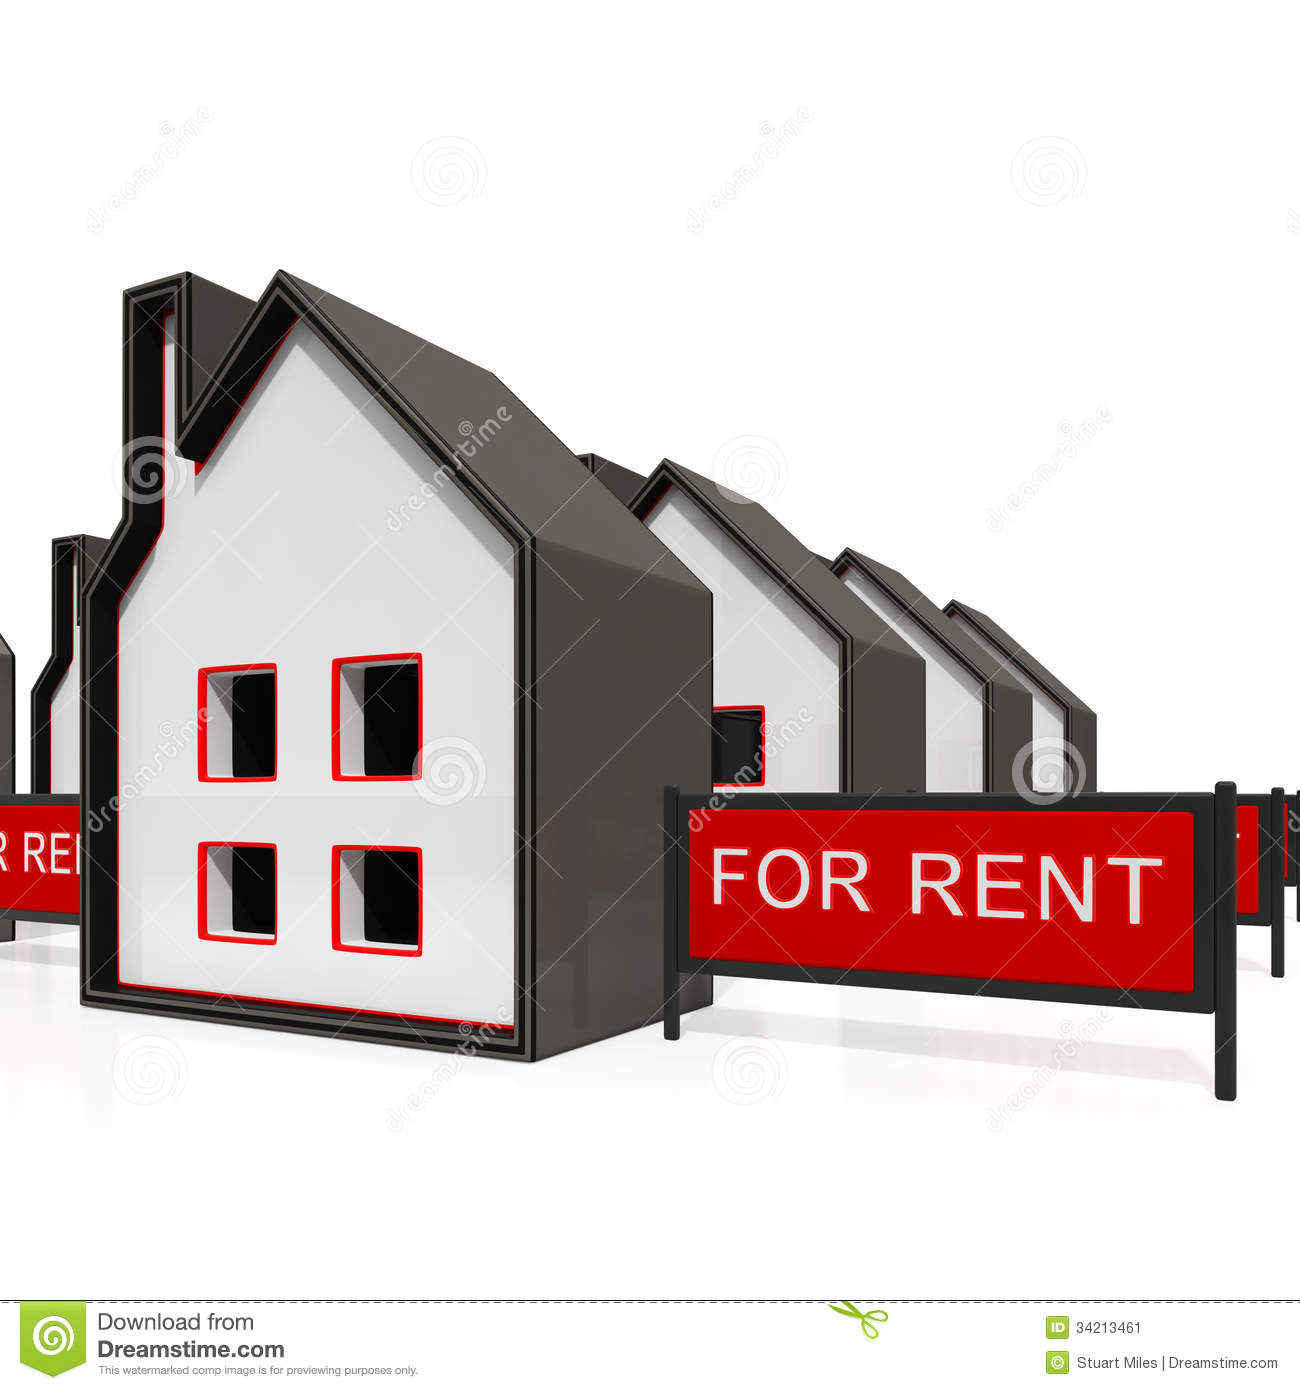 House For Rent Sign Shows Rental Stock Image   Image  34213461